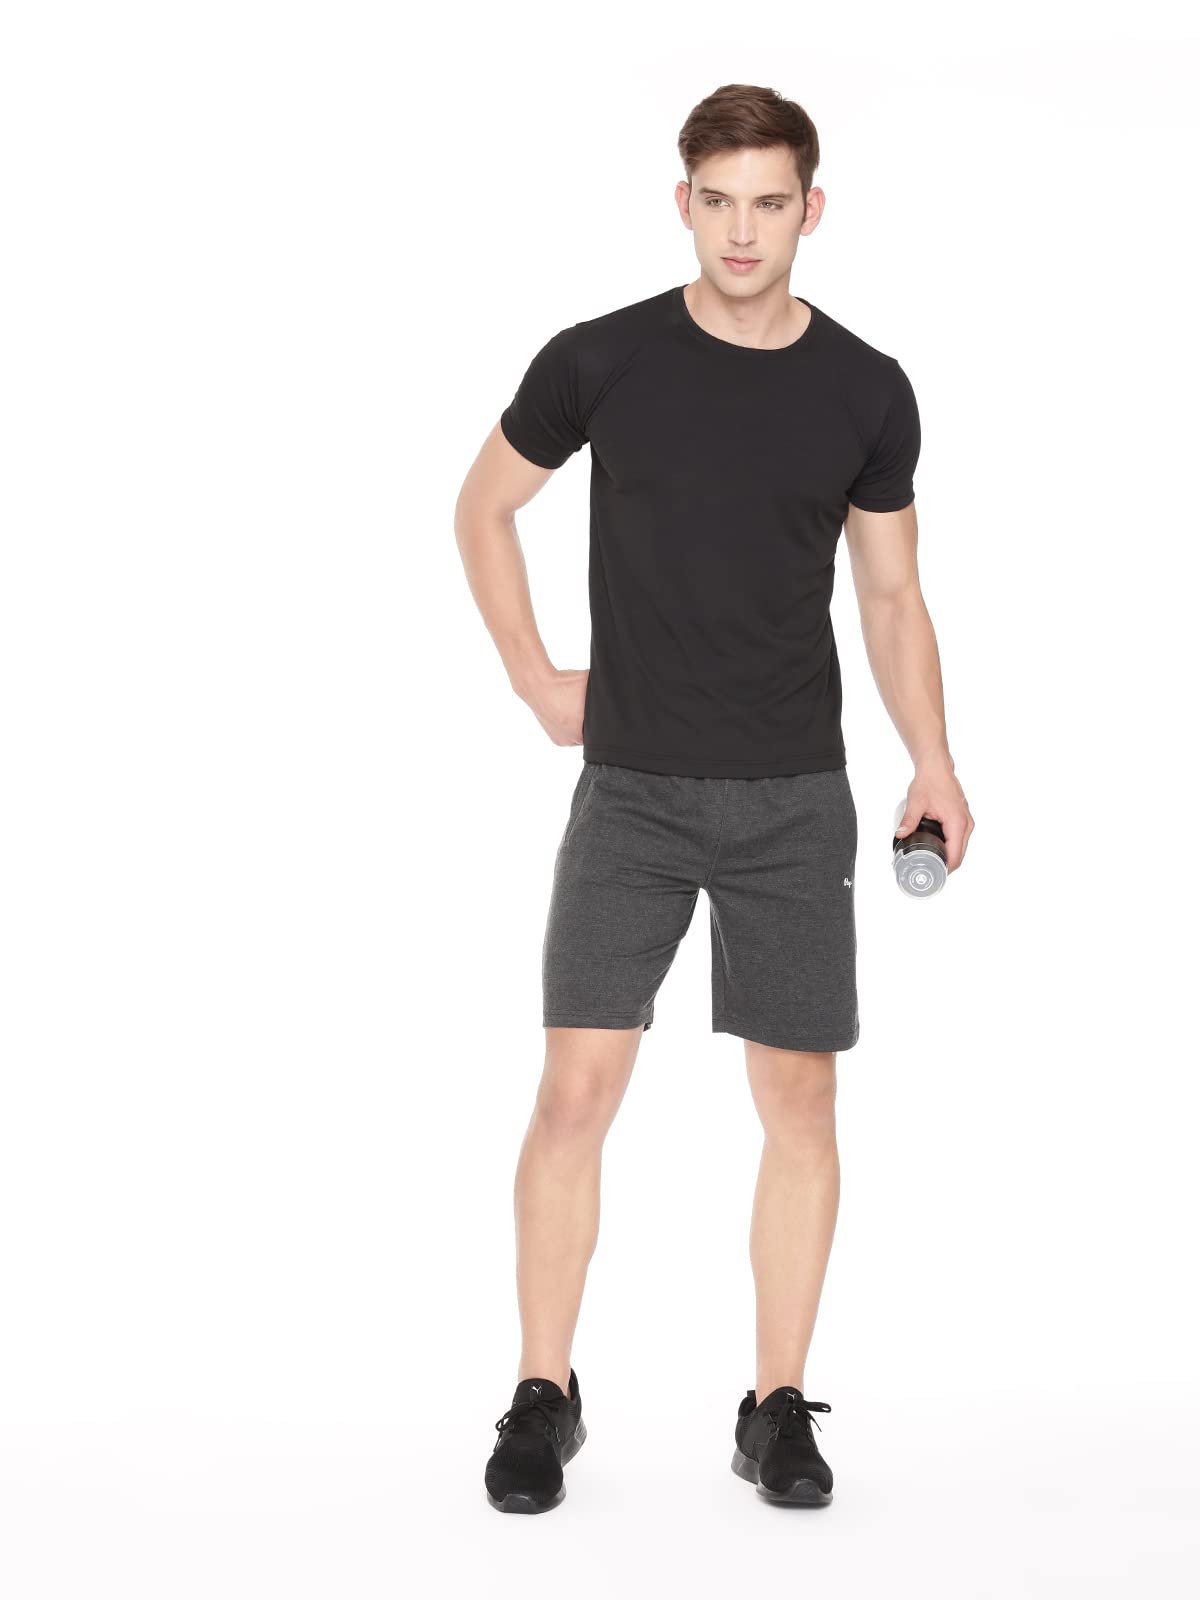 Pepe Jeans Athleisure Men Knit Cotton Stretch Shorts | Breathable Cotton Jersey, Gym and Casual Wear | with Drawstring and Zip Pocket in Black Melange - M